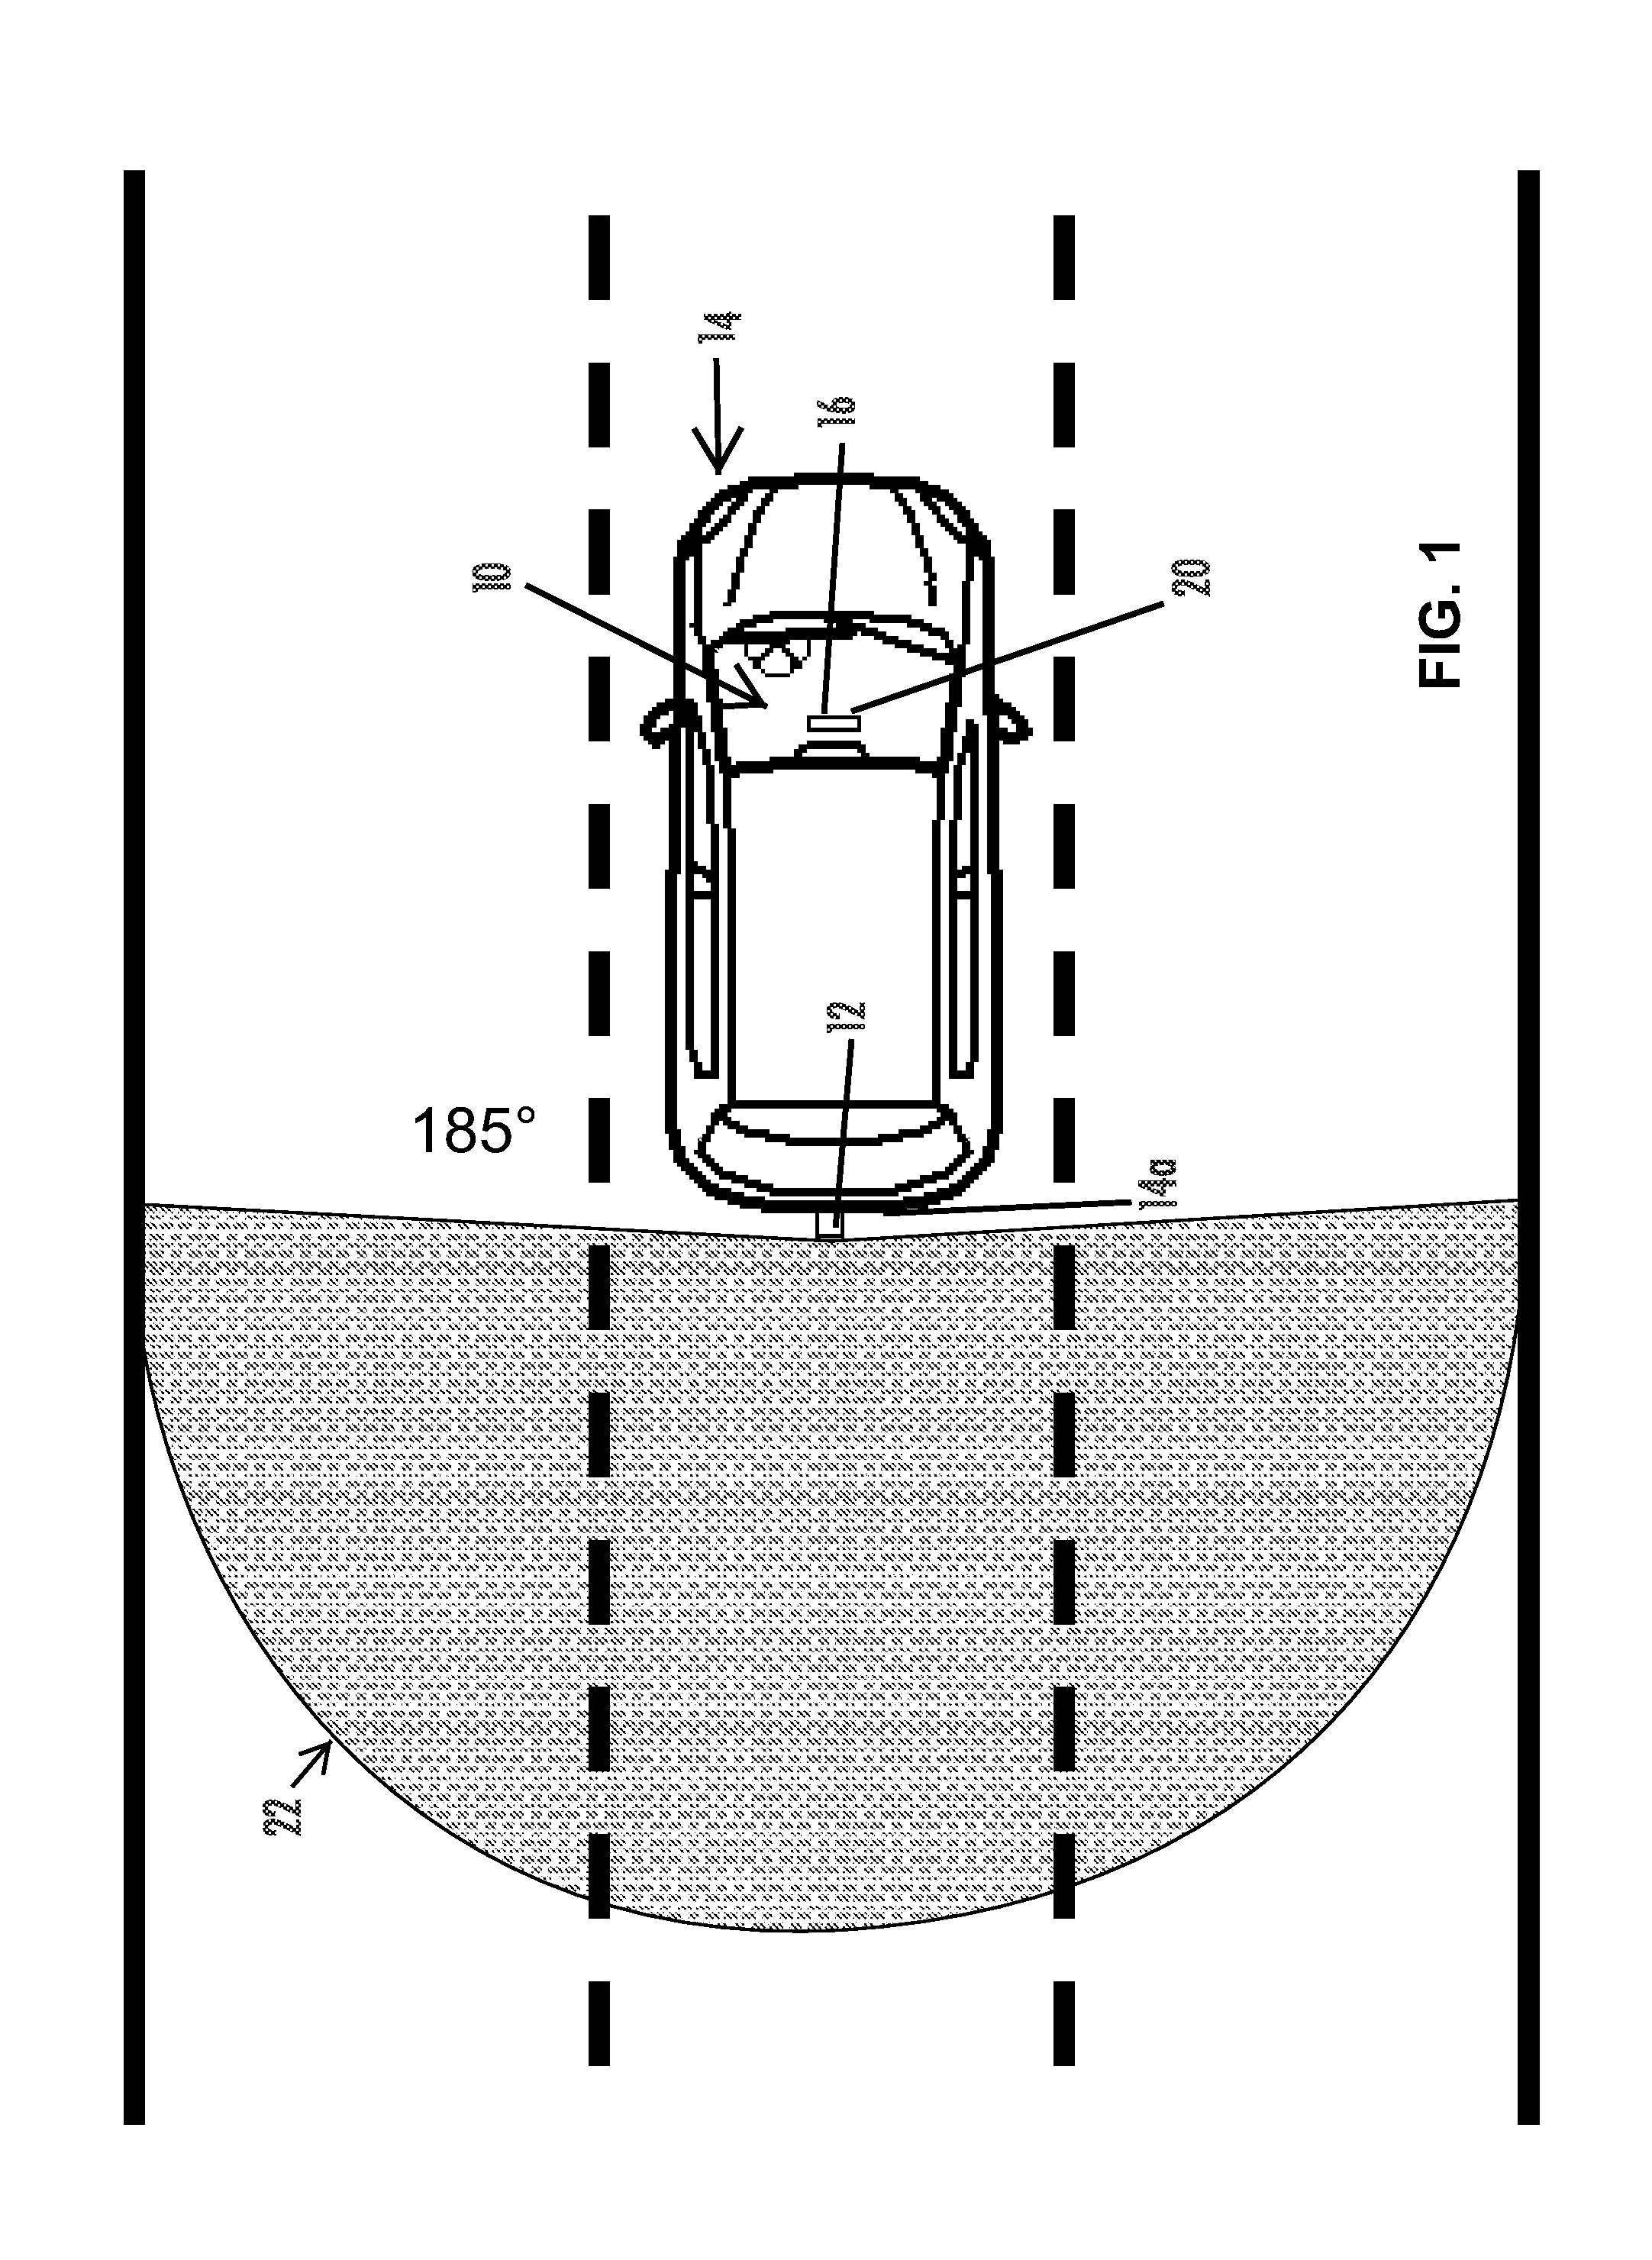 Imaging and display system for vehicle